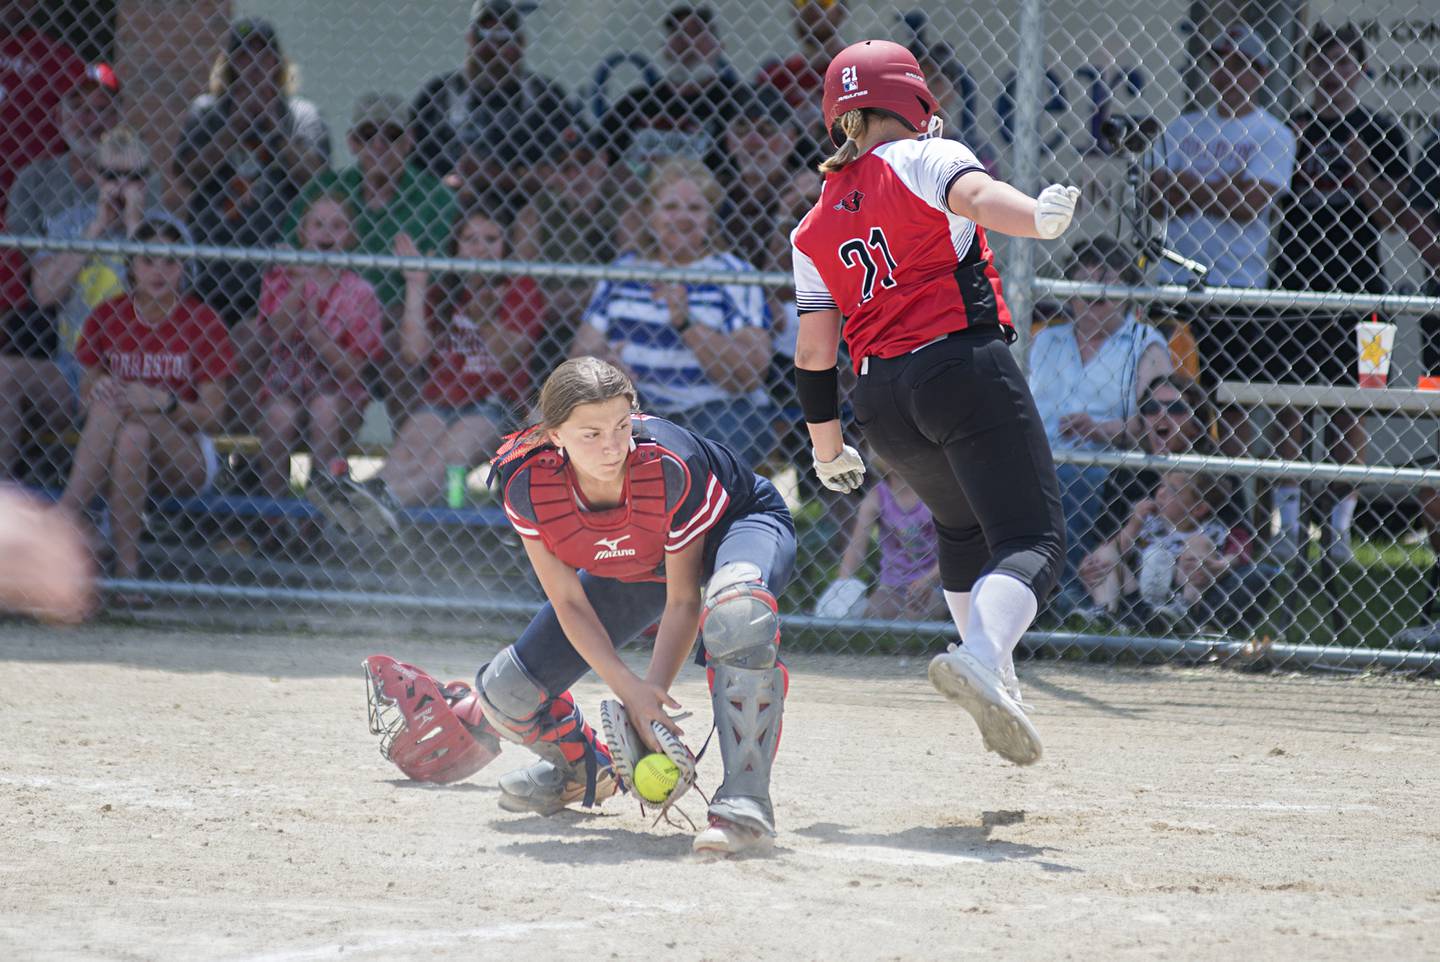 Forreston’s Aubrey Sanders comes in to score to make it a one run game against West Central Monday, May 30, 2022.